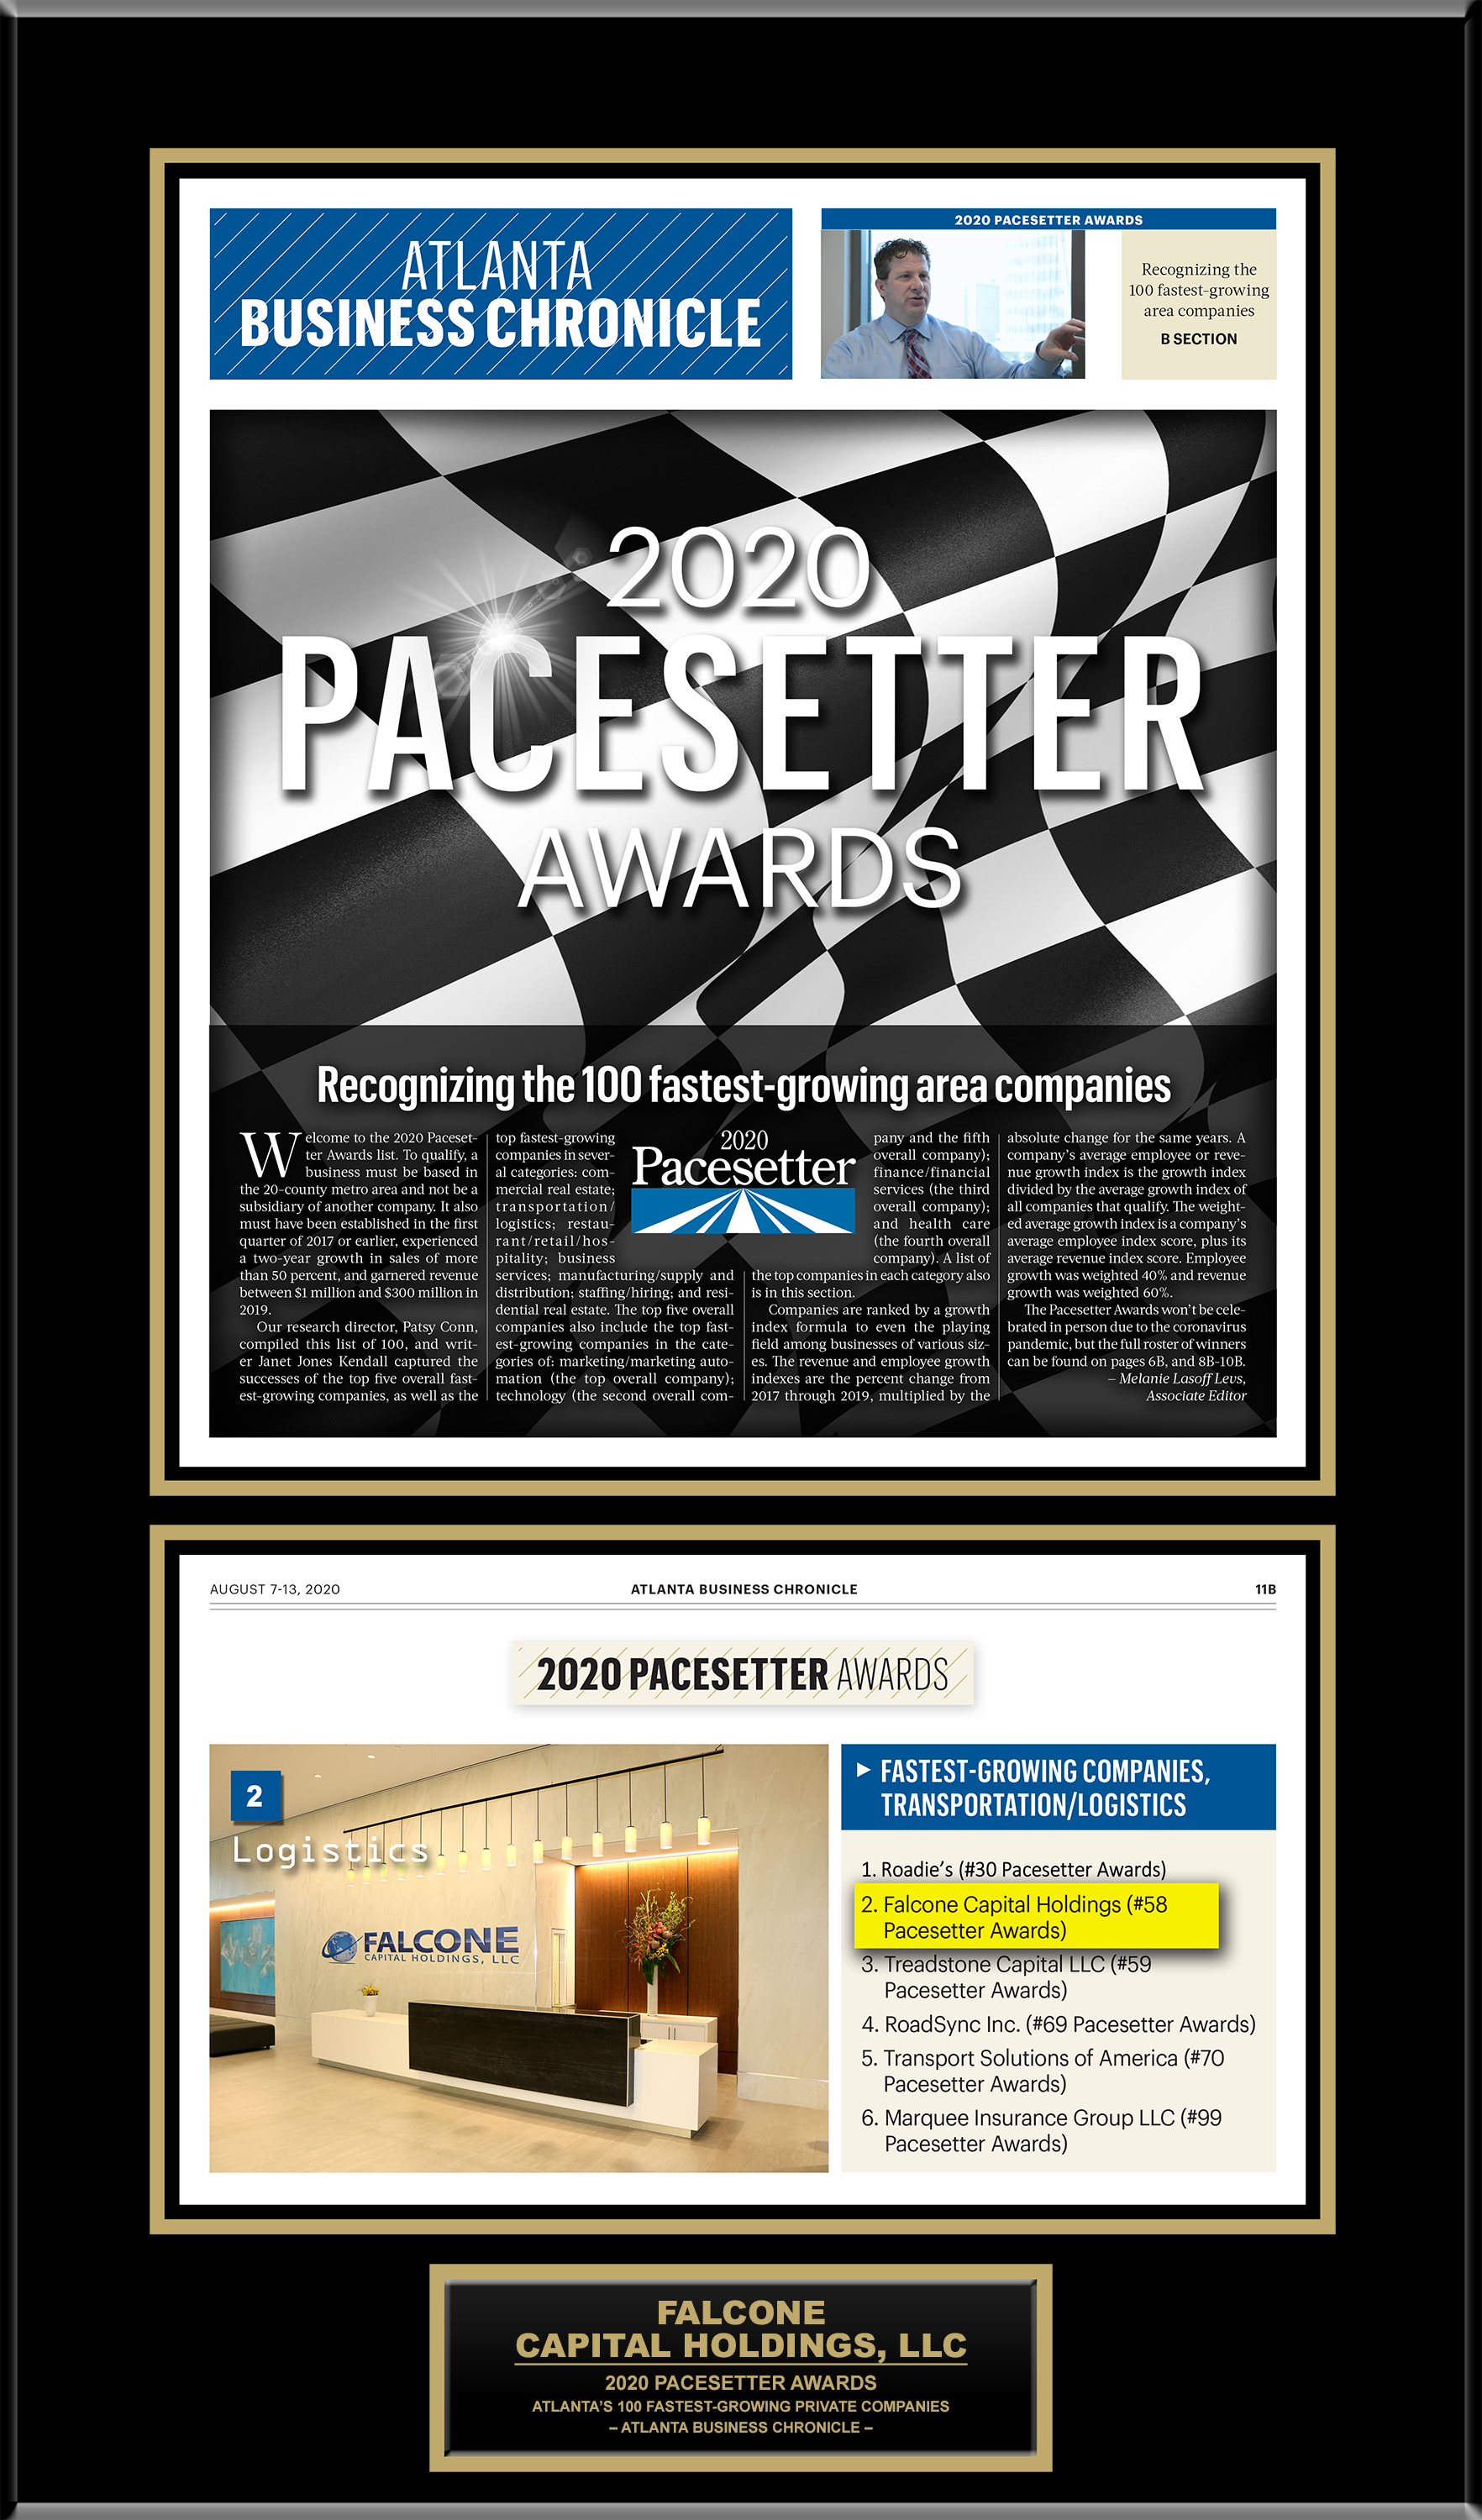 Falcone Capital Holdings - 2020 Pacesetter Award